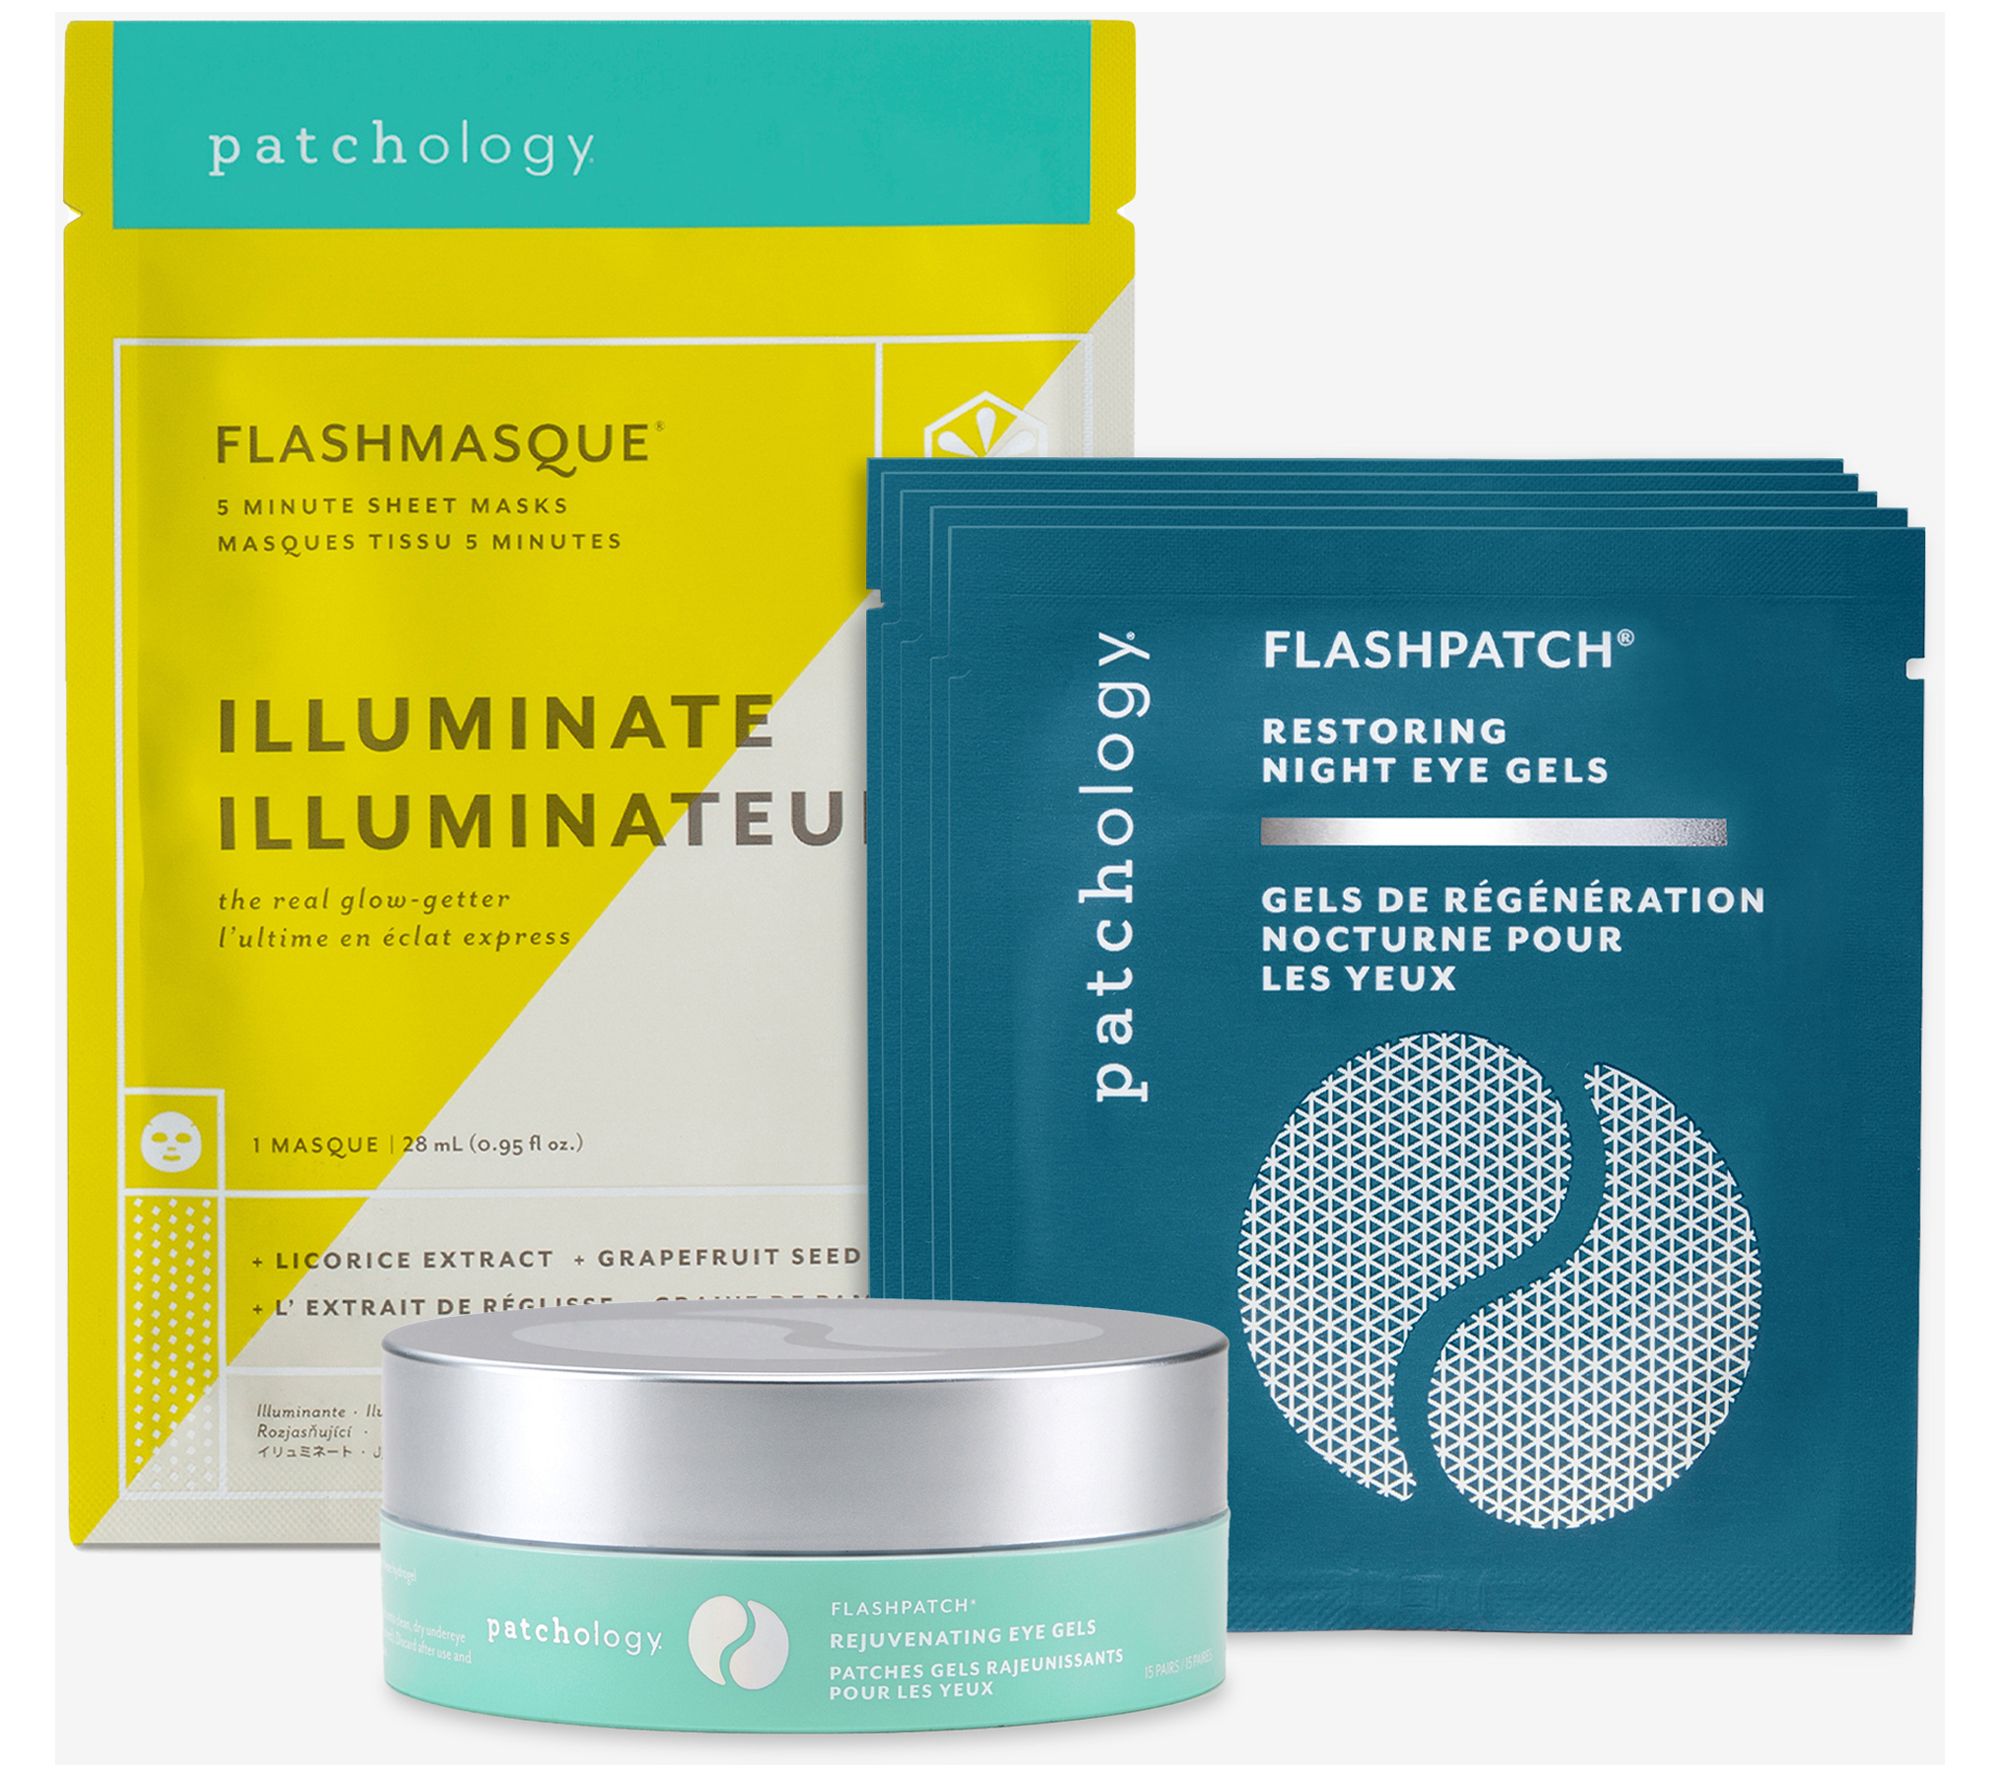 Patchology FlashMasque Soothe - 4 Pack 